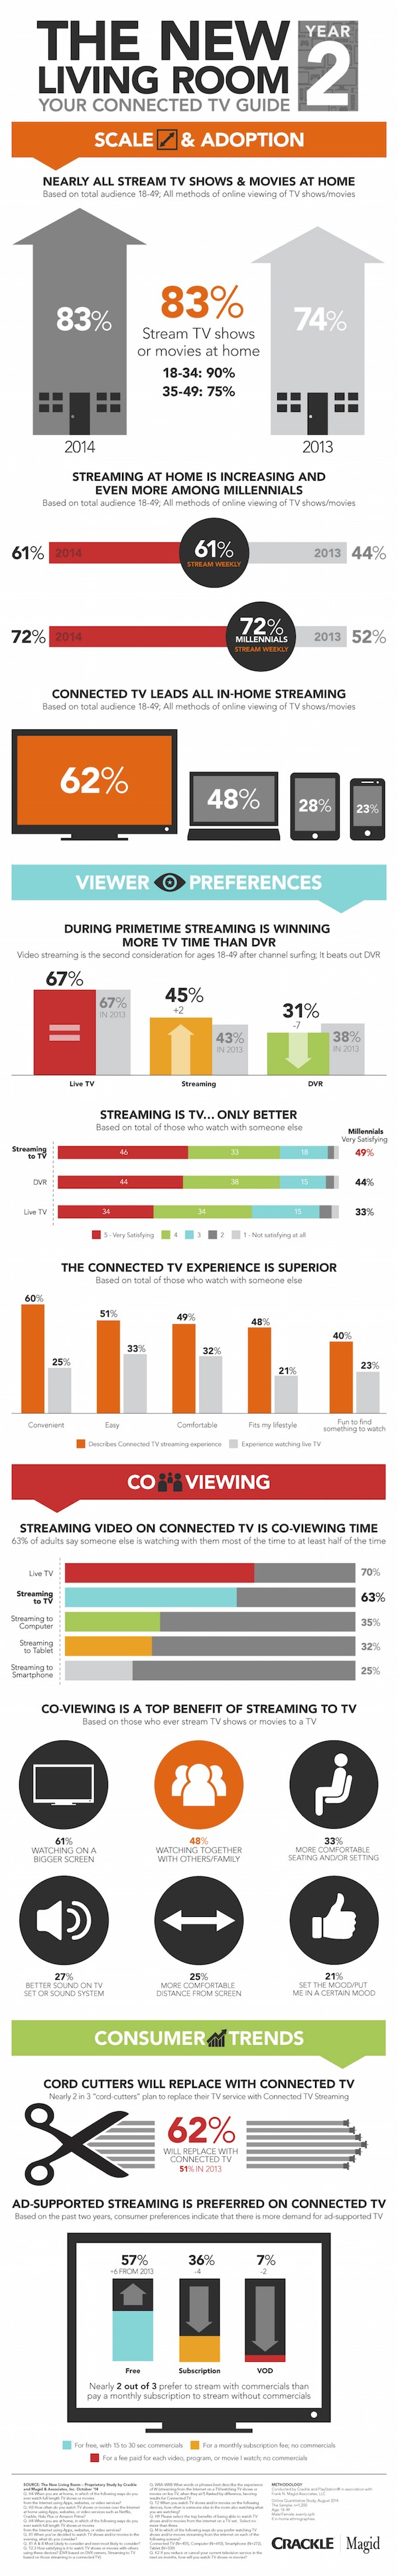 crackle-streaming-infographic